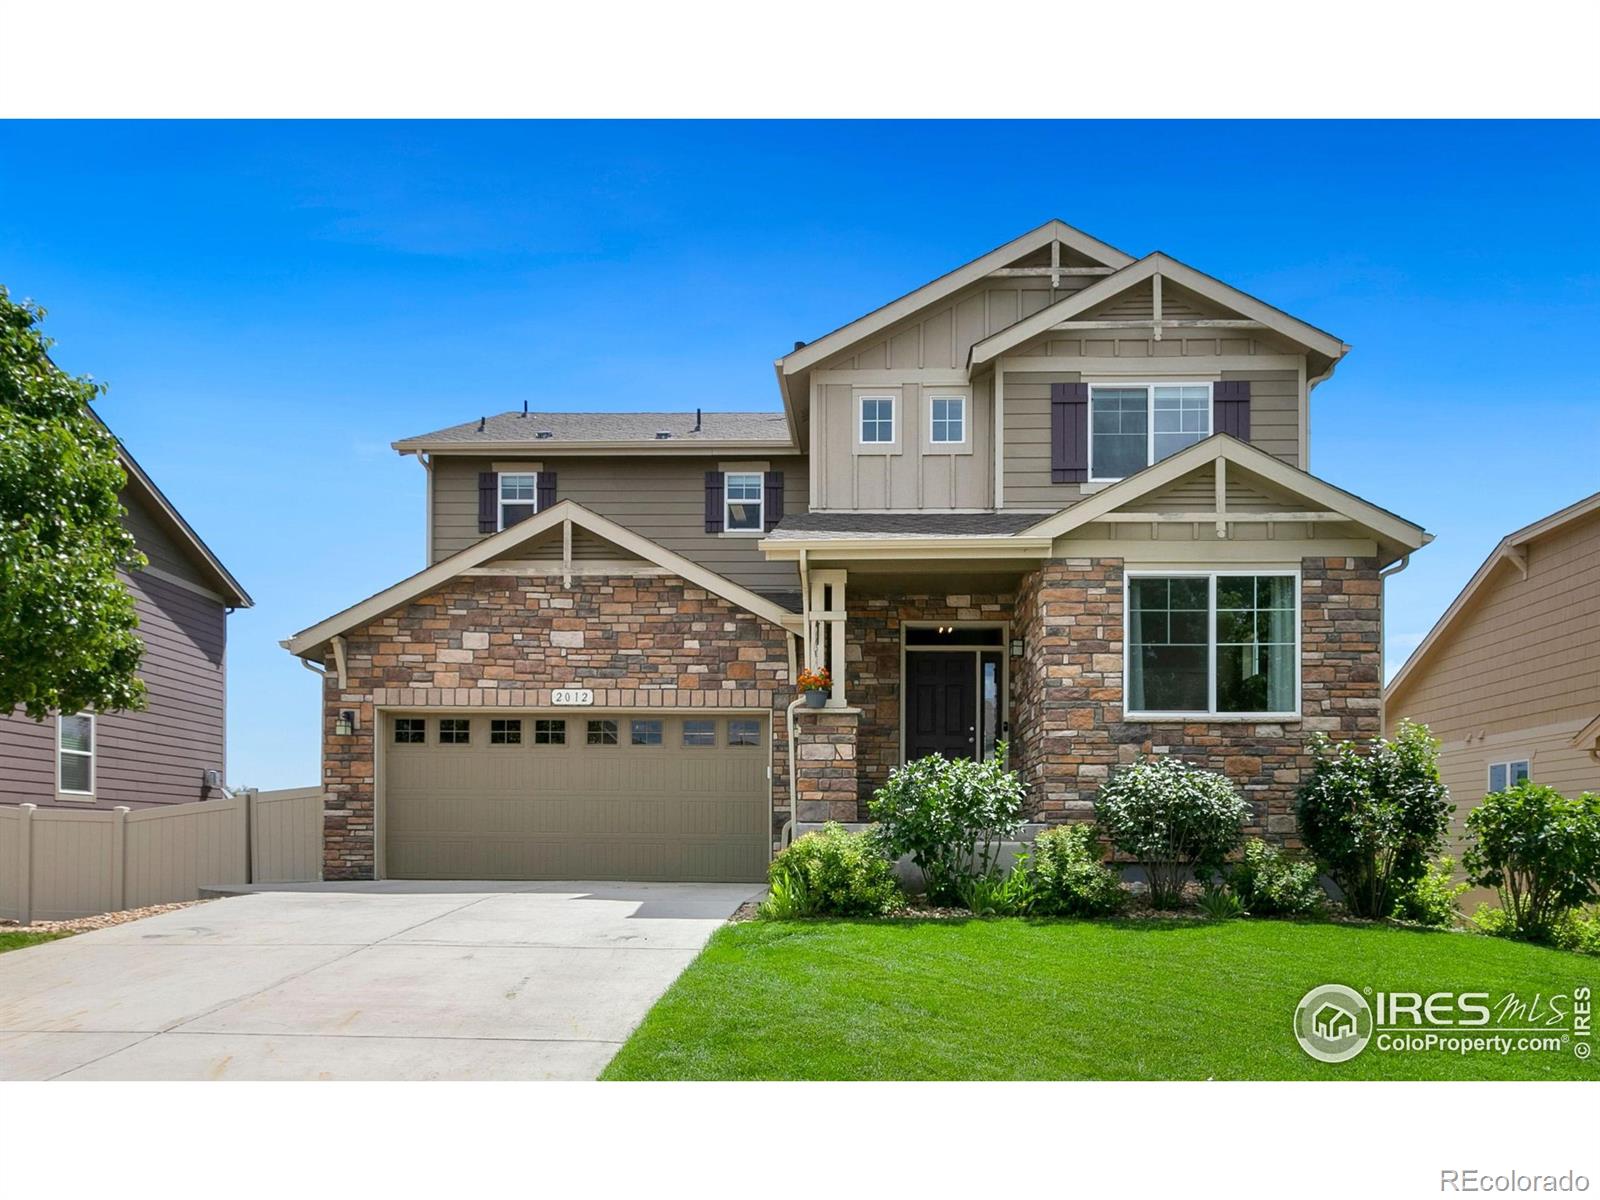 2012  80th Ave Ct, greeley MLS: 123456789992988 Beds: 4 Baths: 4 Price: $545,000